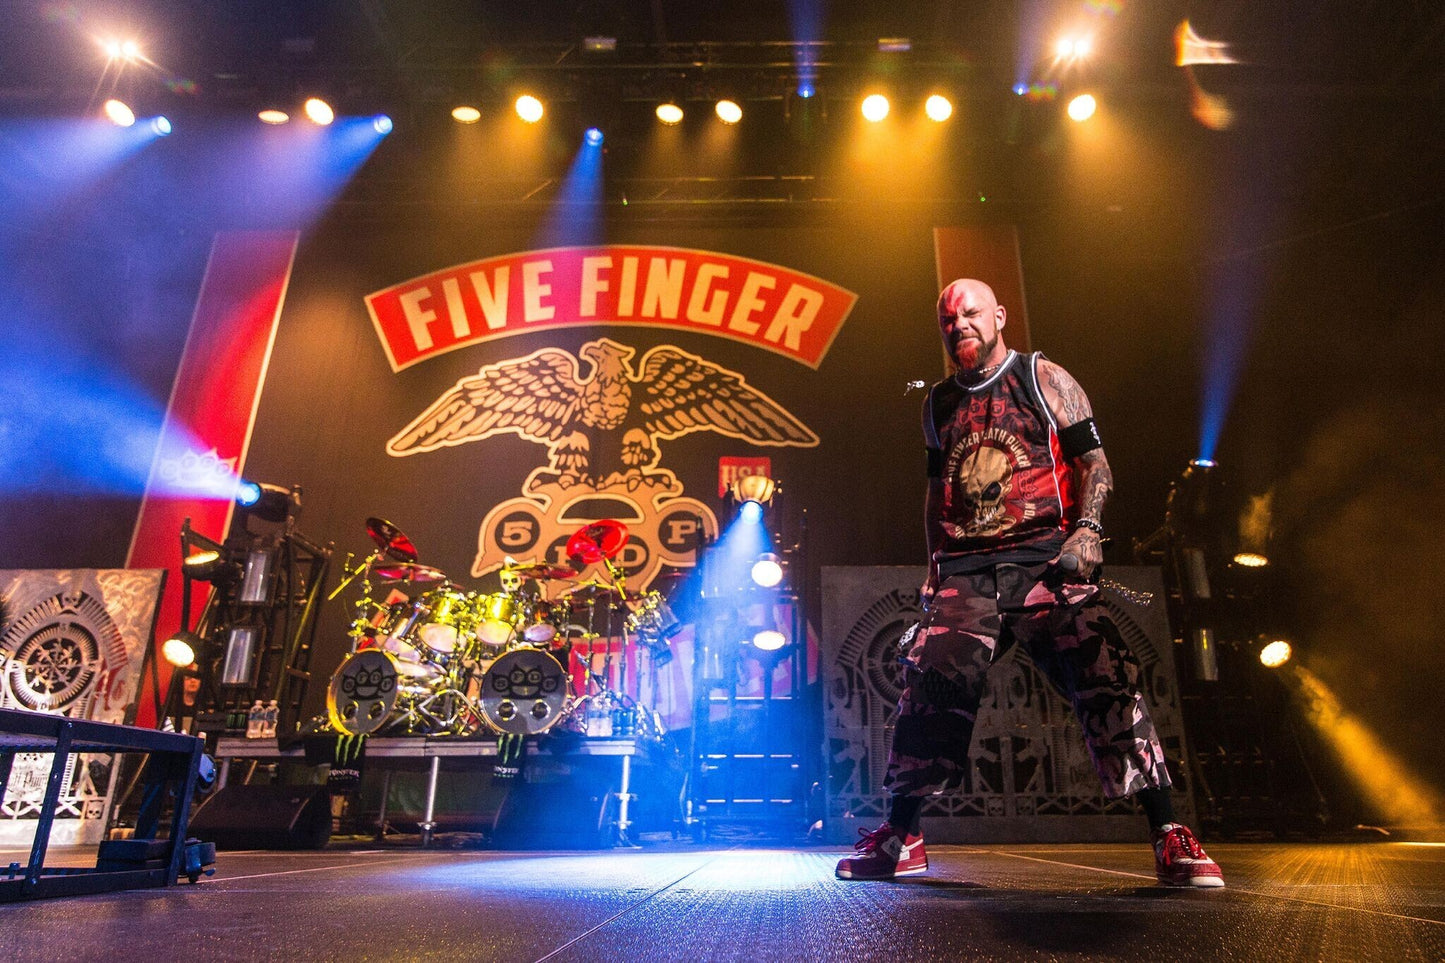 Five Finger Death Punch - Band on Stage with Banner Backdrop, Canada, 2016 Poster (2/3)